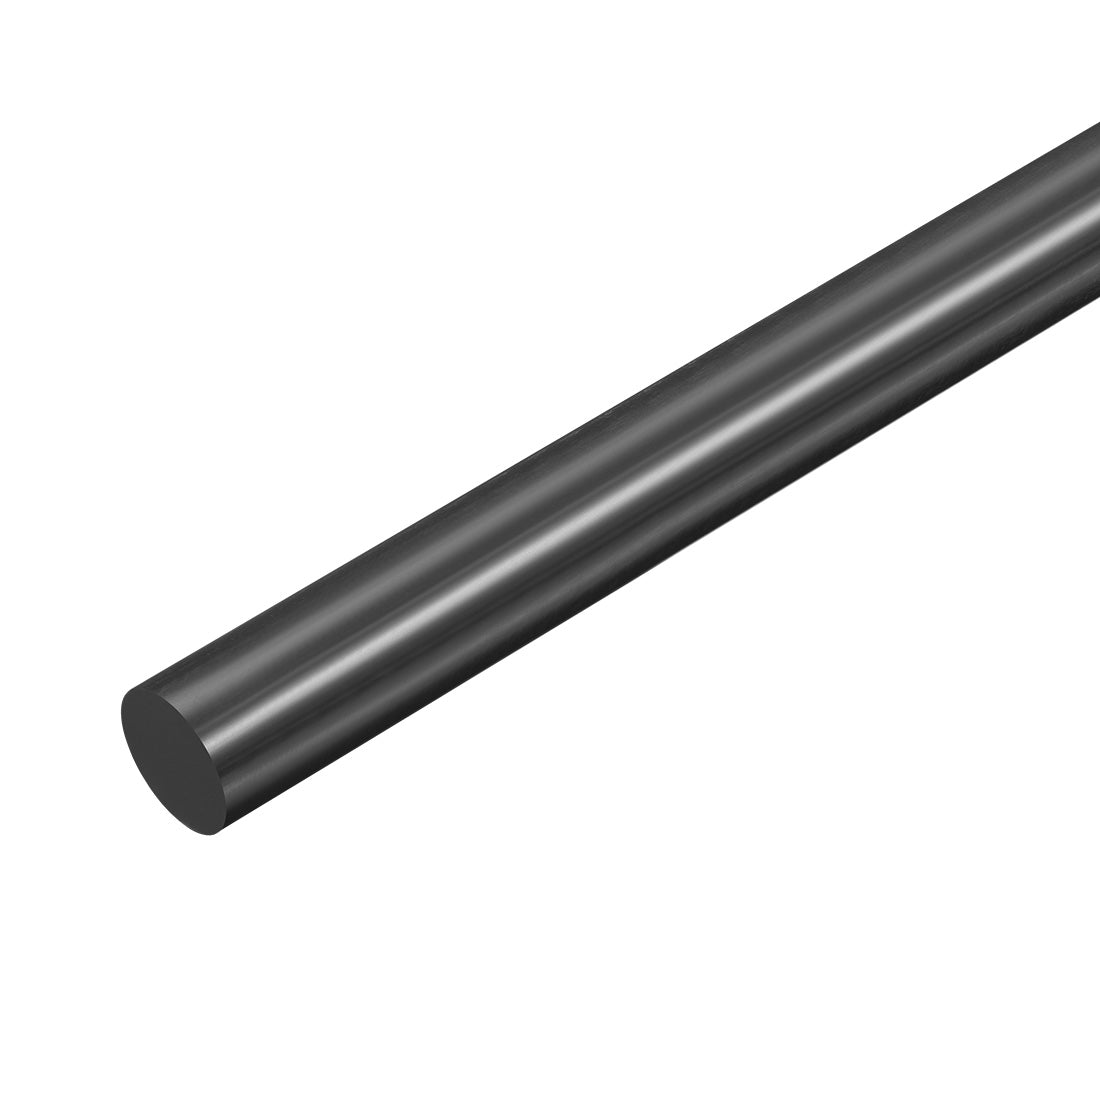 uxcell Uxcell Plastic Round Rod,15mm Dia 50cm Black Engineering Plastic Round Bar